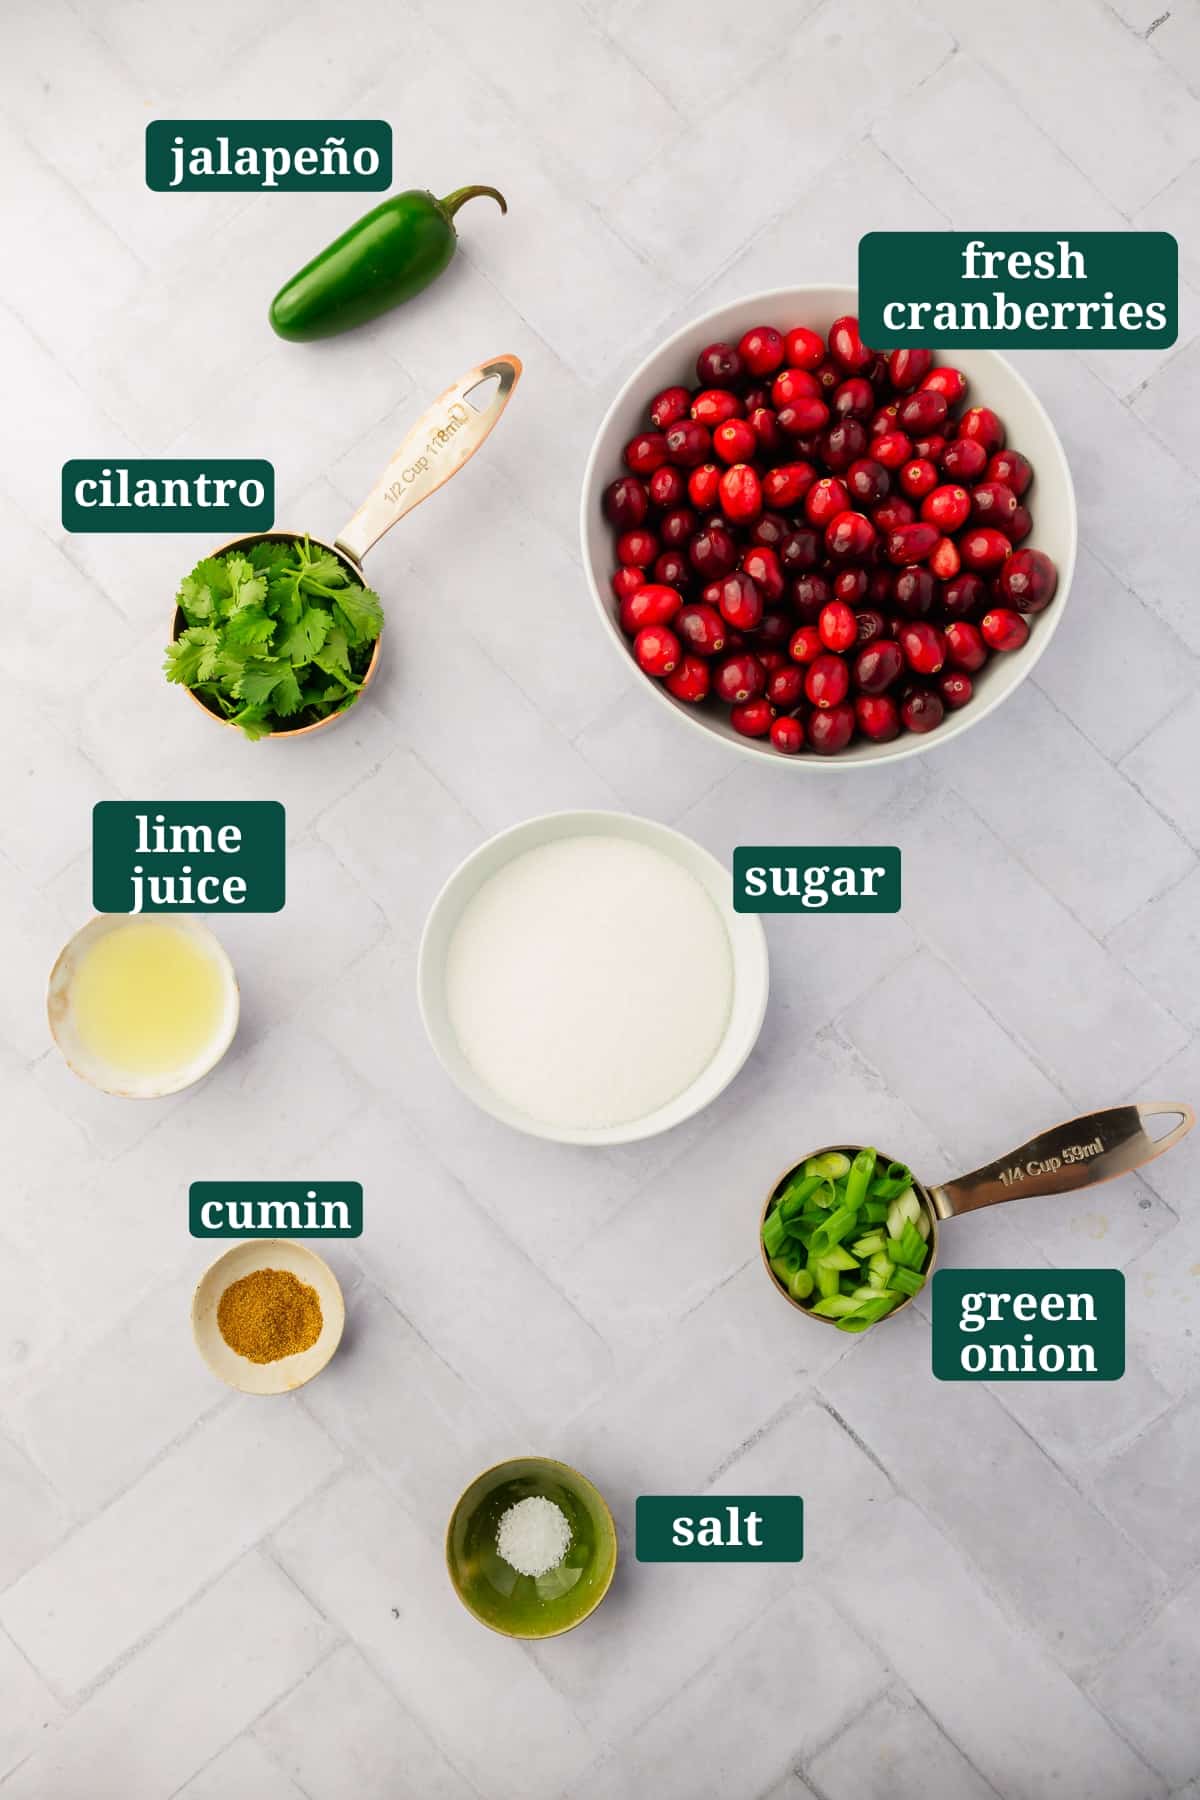 Ingredients in small bowls to make cranberry jalapeño salsa, including jalapeño, cranberries, green onions, sugar, lime juice, salt, and cilantro with text overlays over each ingredient.